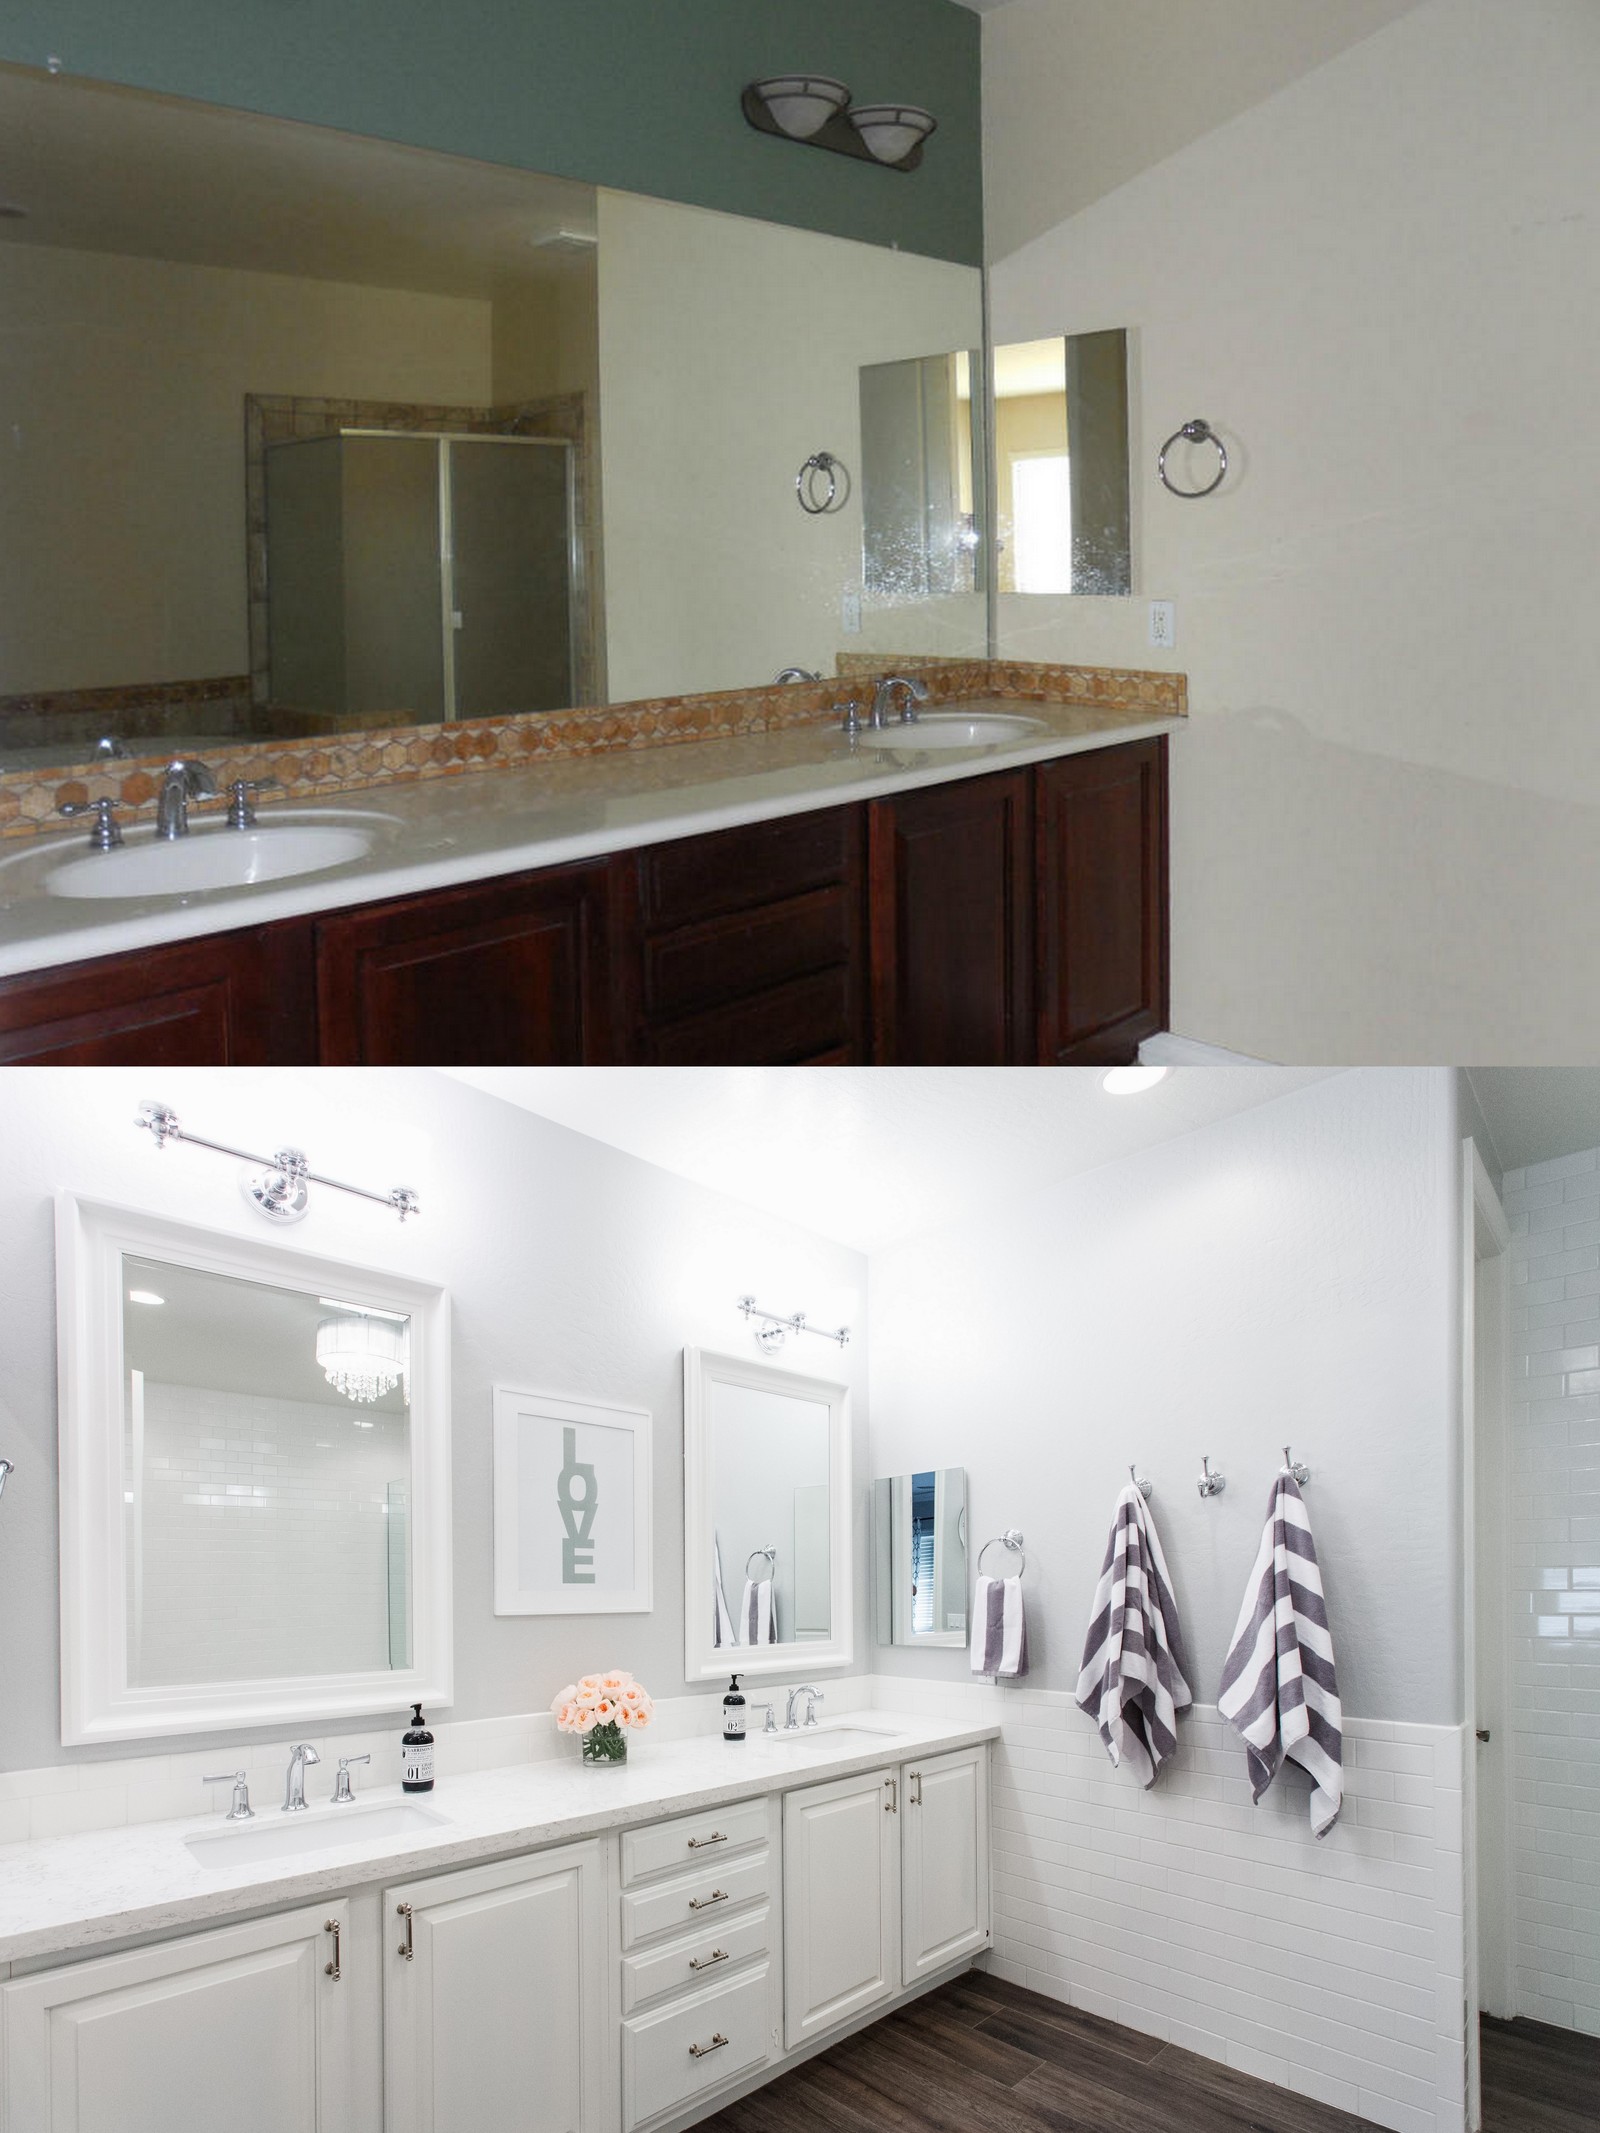 Master Bathroom Before and After